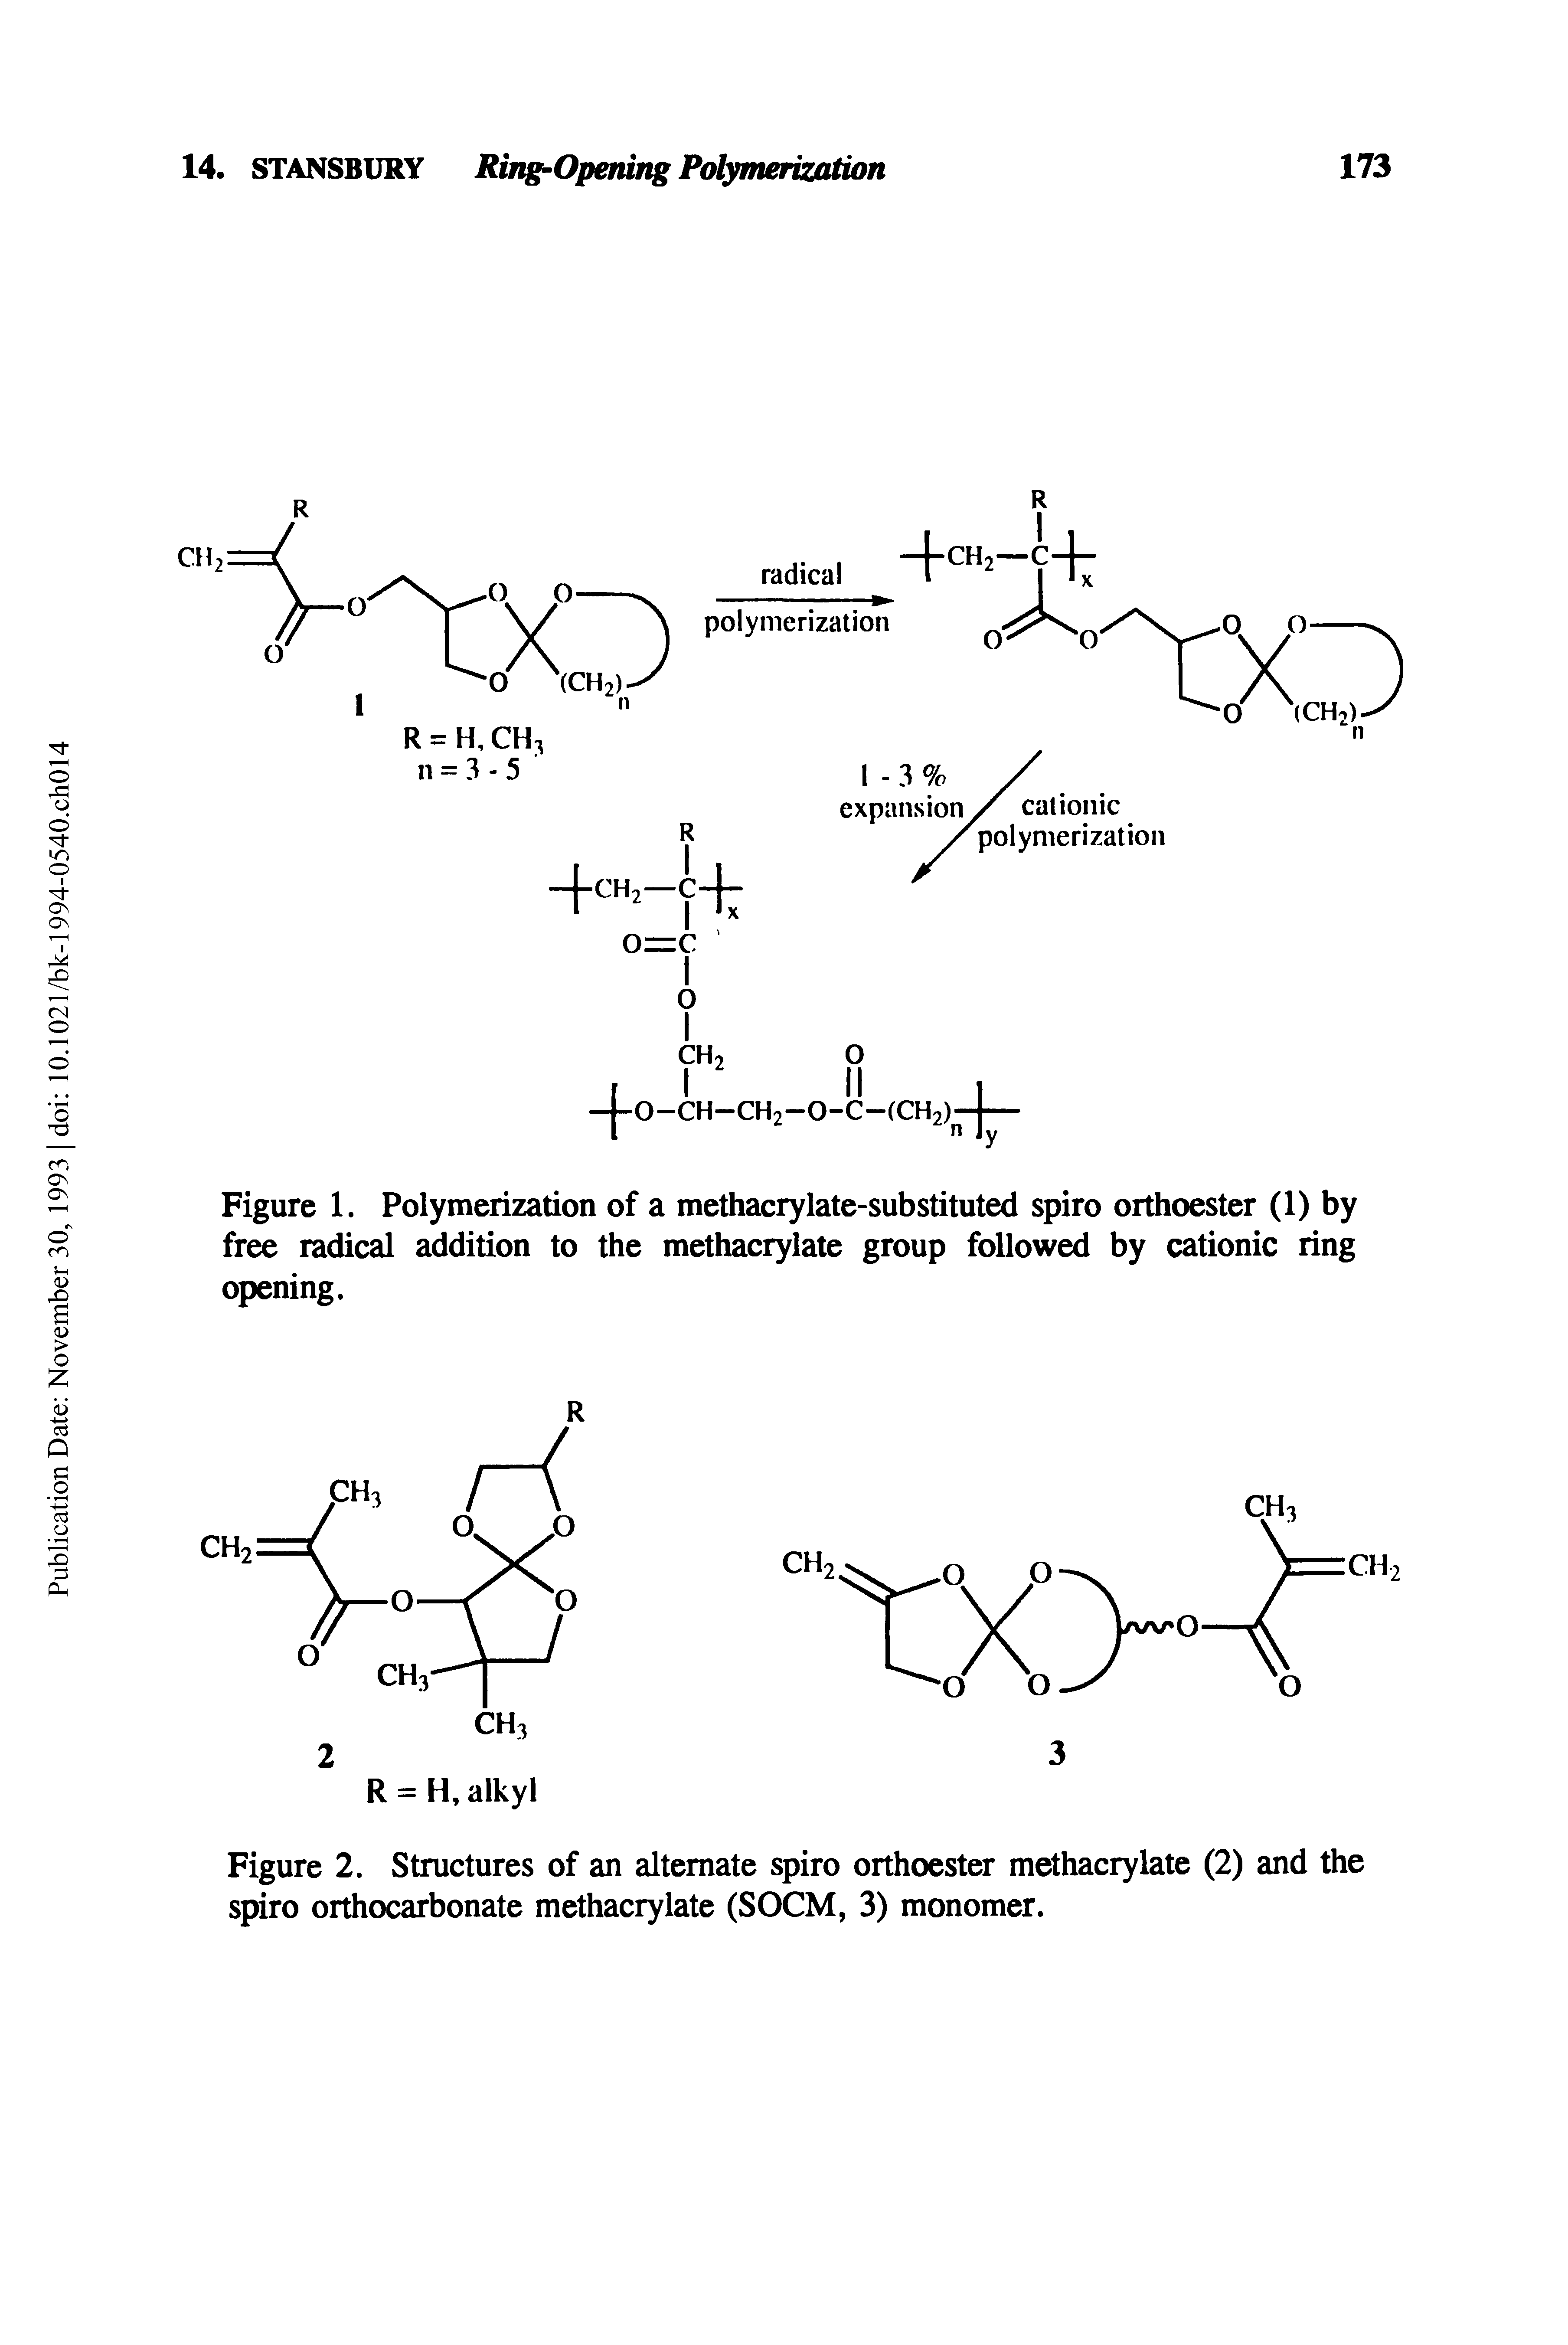 Figure 1. Polymerization of a methacrylate-substituted spiro orthoester (1) by free radical addition to the methacrylate group followed by cationic ring opening.